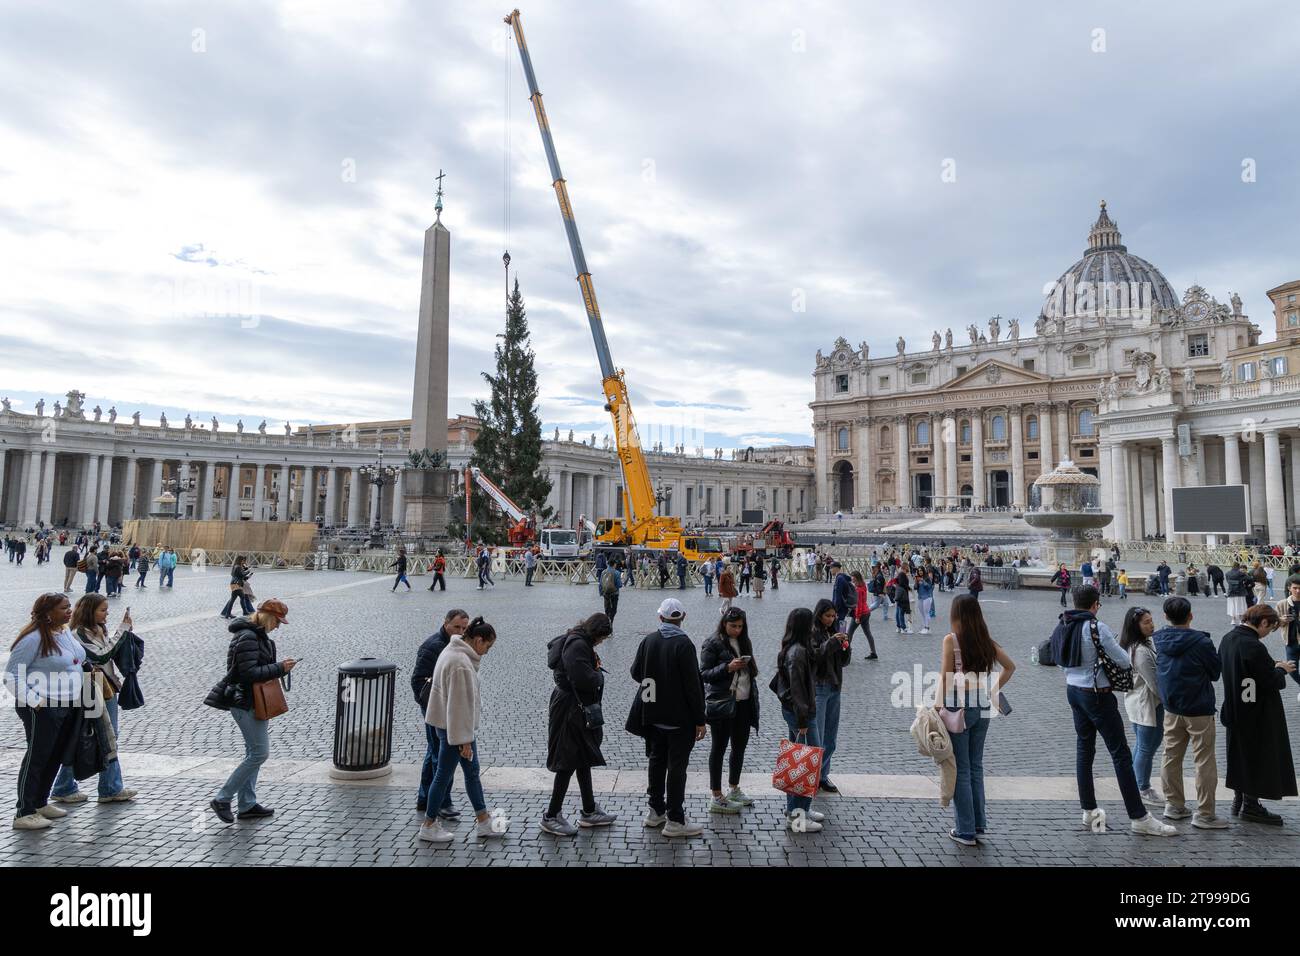 Rome, Italy. 23rd Nov, 2023. Installation of the Christmas Tree in St. Peter's Square with tourists queuing waiting to enter St. Peter's Basilica. The Christmas tree arrived in St. Peter's Square with 27 meters high, it weighs 6.5 tons and was donated by the municipality of Macra, in the woods of Cuneo. It will be decorated with lights and over 7,000 dried edelweiss which will give the effect of a snowfall. The lights will be turned on next December 9. (Photo by Matteo Nardone/Pacific Press) Credit: Pacific Press Media Production Corp./Alamy Live News Stock Photo